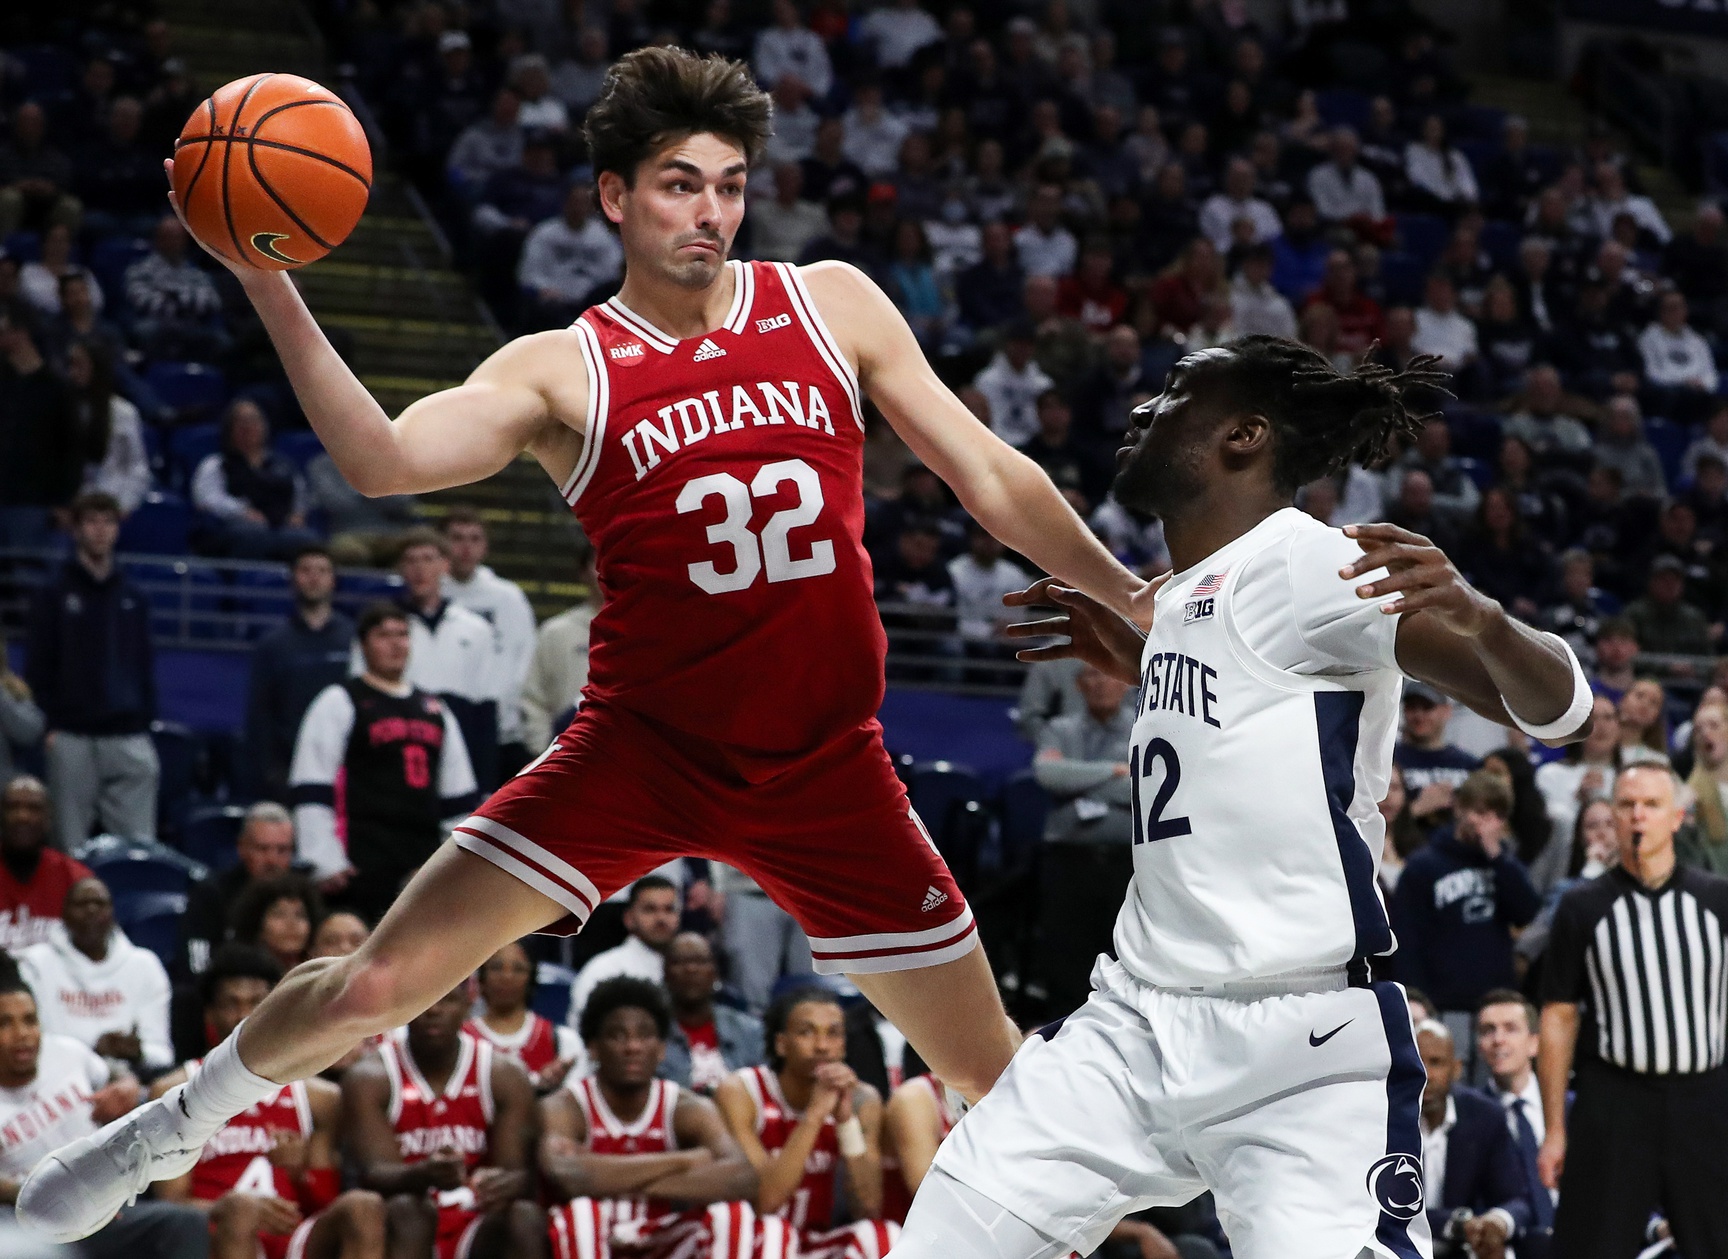 Indiana Hoosiers guard Trey Galloway (32) passes the ball while attempting to keep it in bounds during the first half against the Penn State Nittany Lions at Bryce Jordan Center.